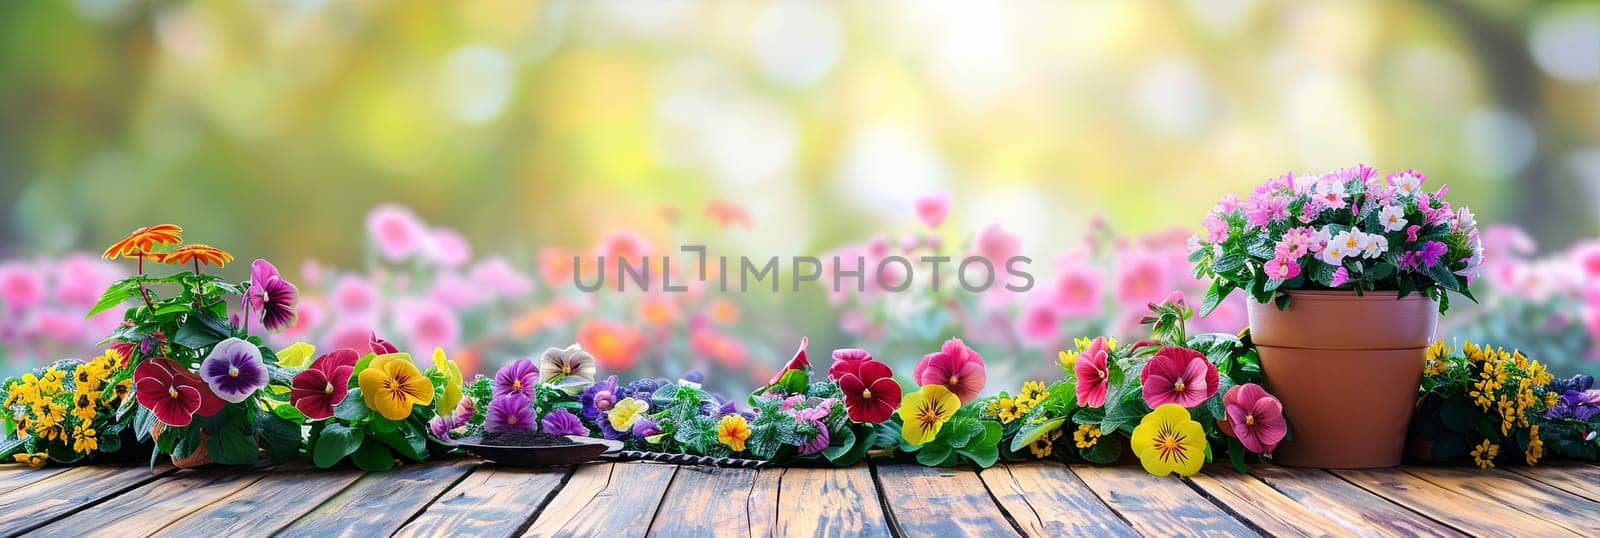 A wooden table displaying a potted plant filled with colorful flowers, surrounded by garden tools, against a blurred natural background.